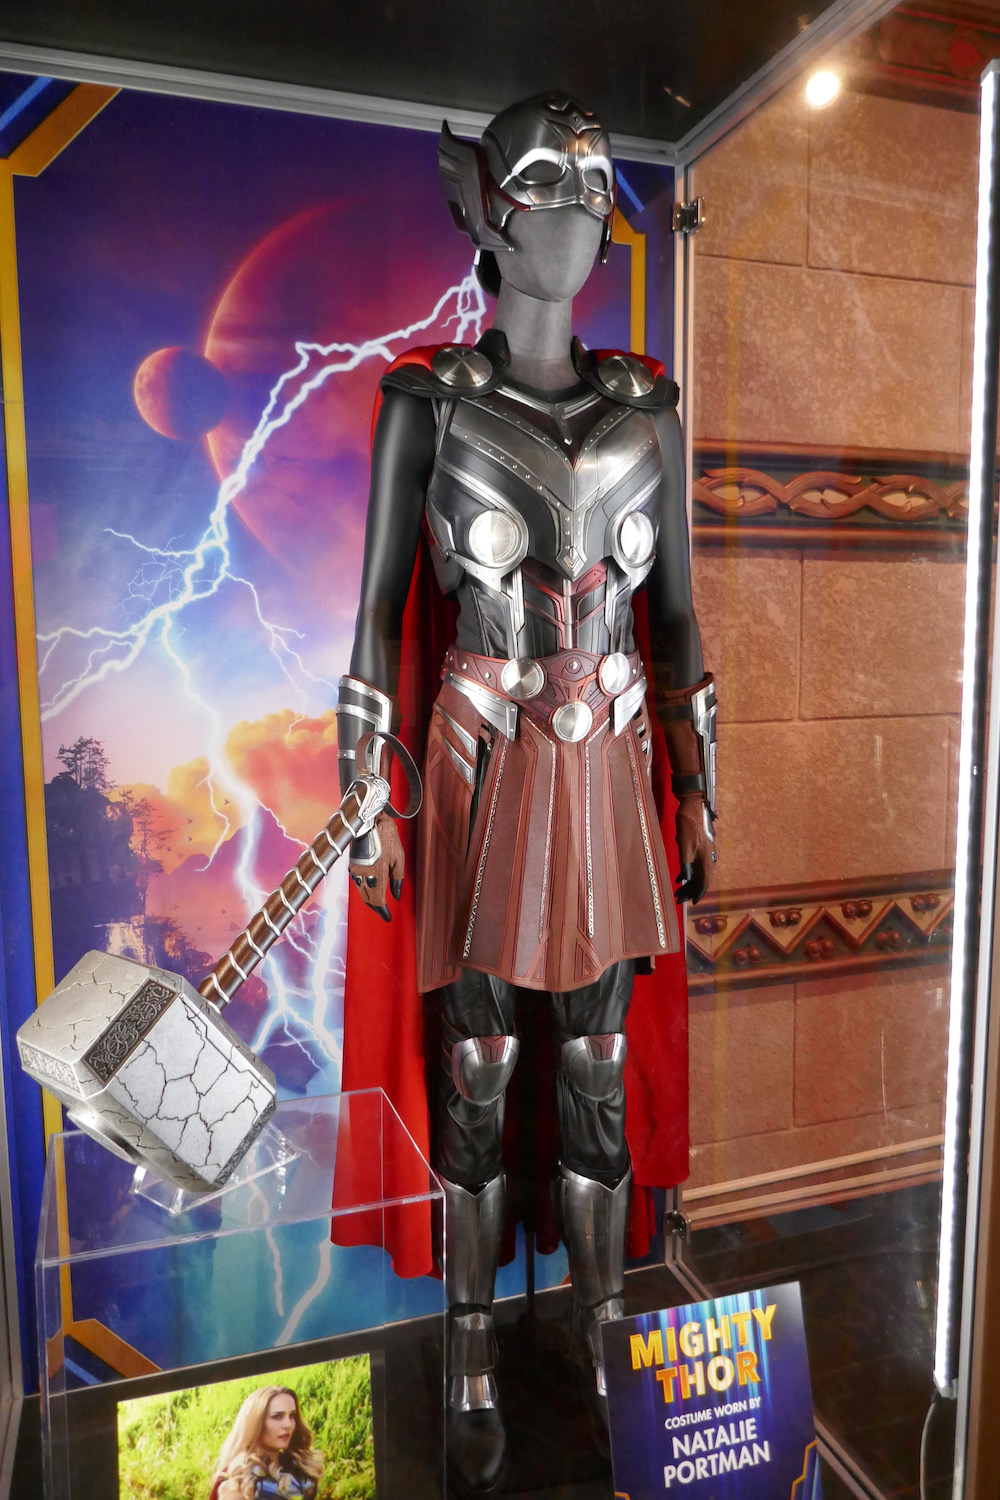 Hollywood Movie Costumes and Props: Natalie Portman's Thor costume from Thor: Love and Thunder on display...